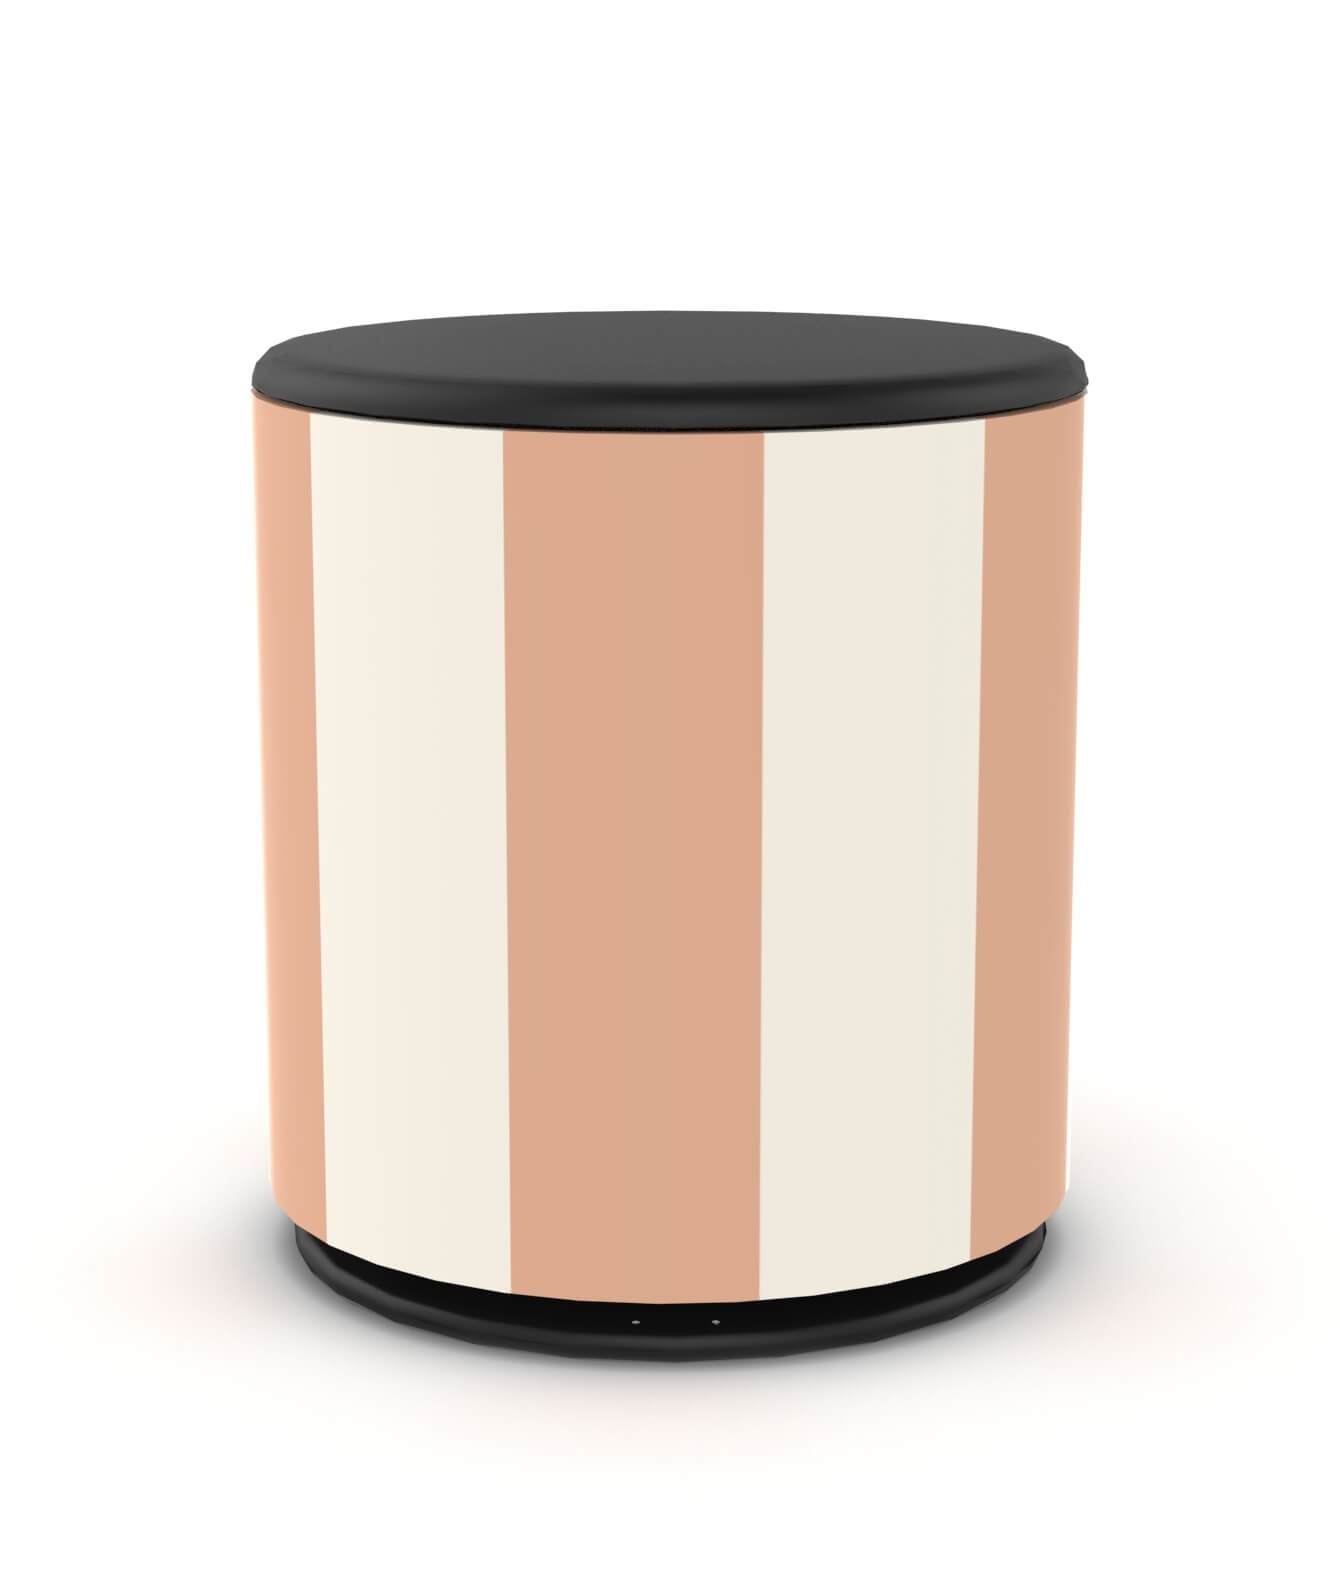 Skiniplay cover Peach for Bang & Olufsen Beoplay M5 speaker